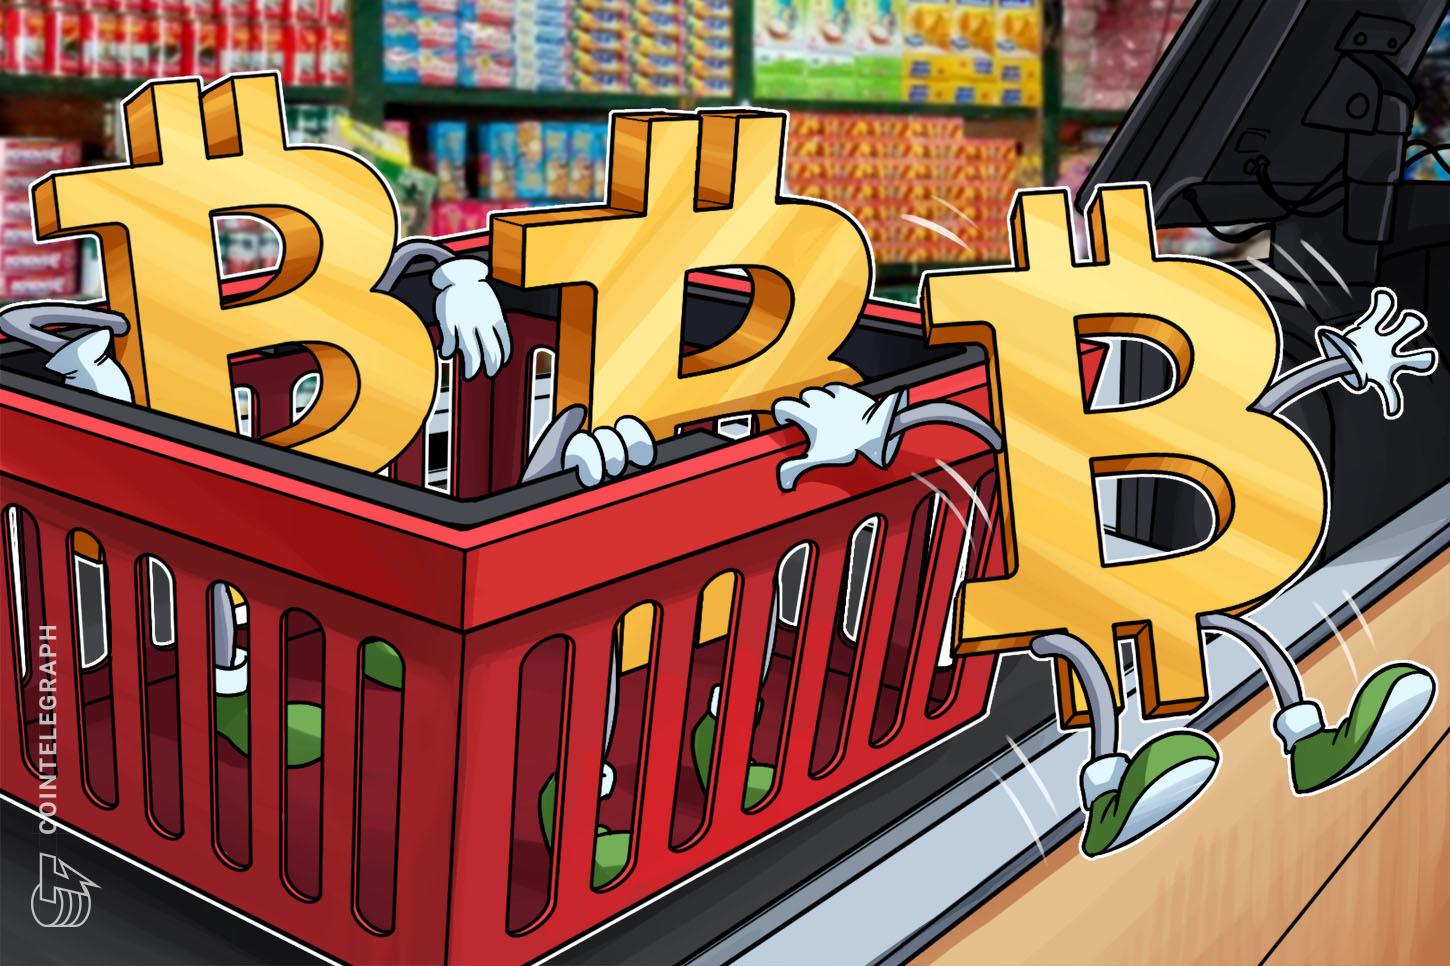 Spike in new members shopping for Bitcoin is ‘clearly bullish’ — Analyst